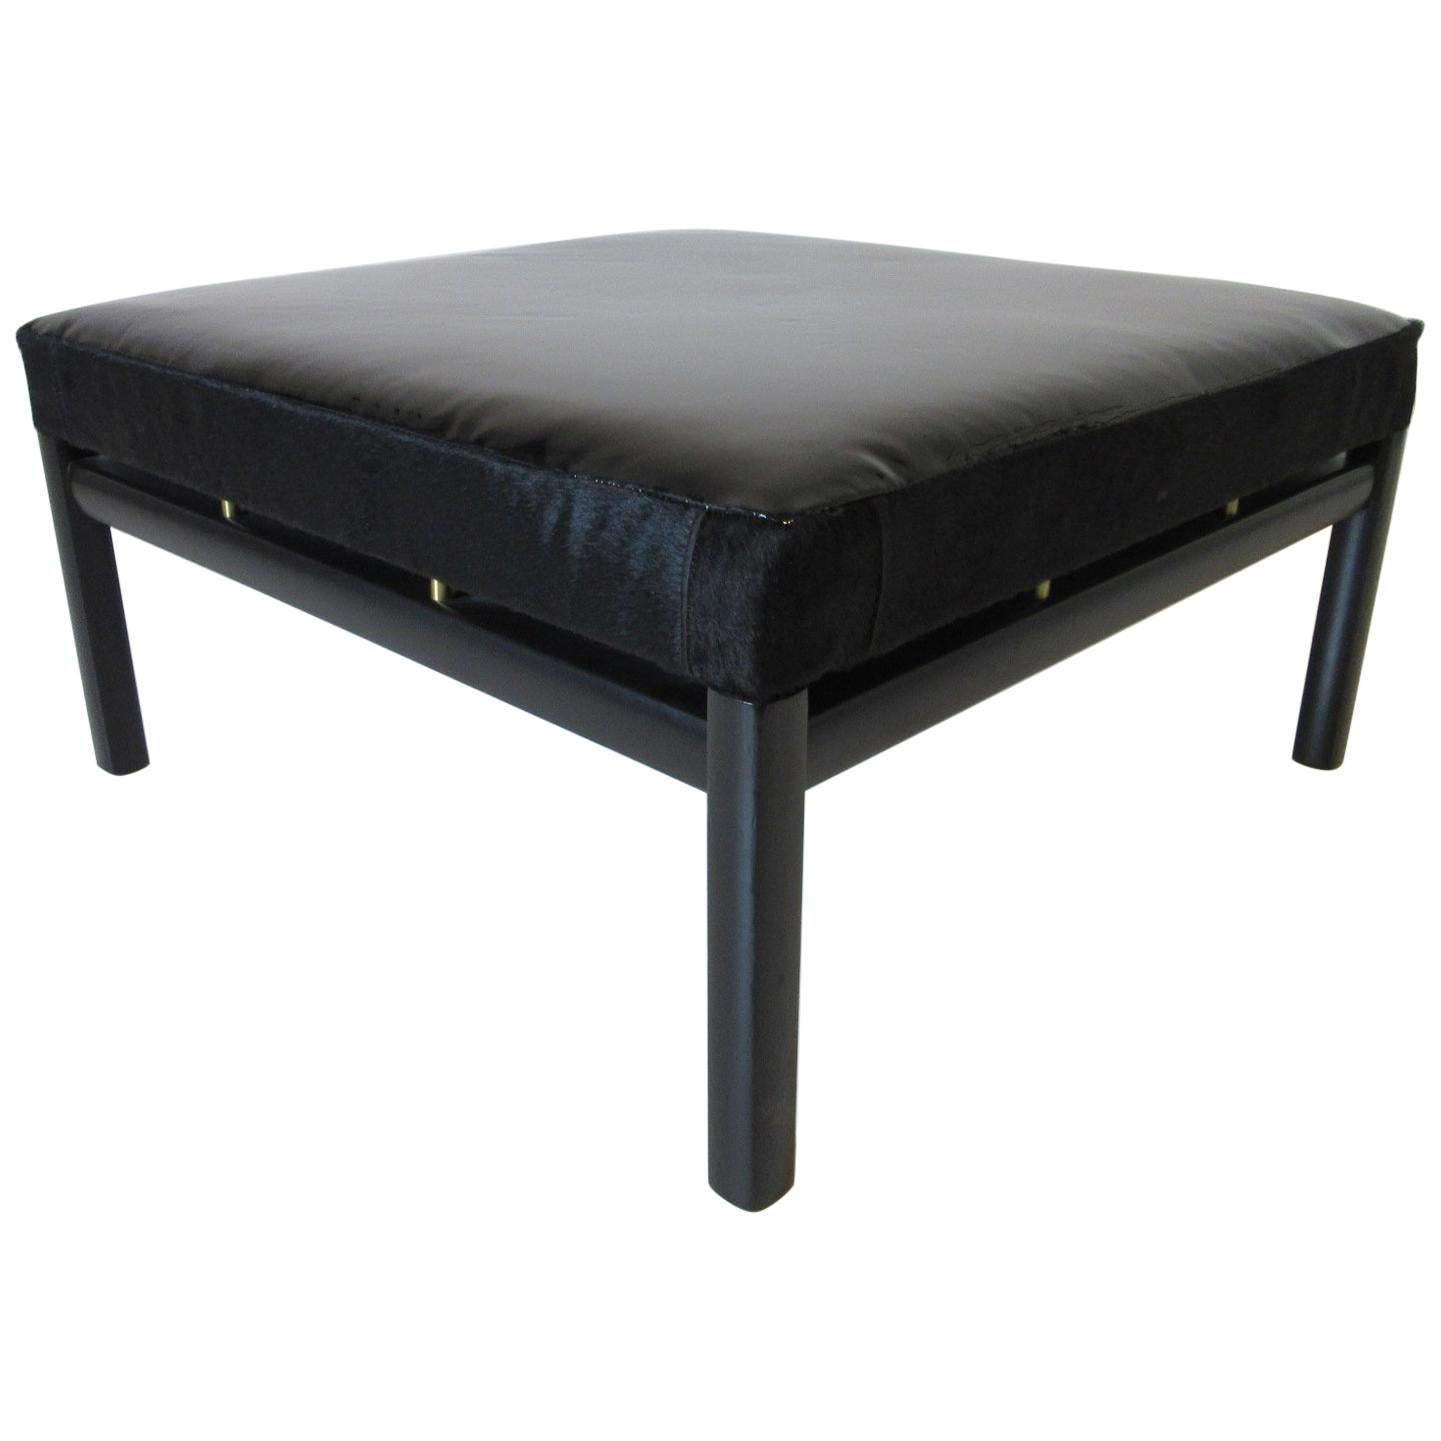 Baker Patent Leather and Pony Hide Ottoman by Micheal Taylor